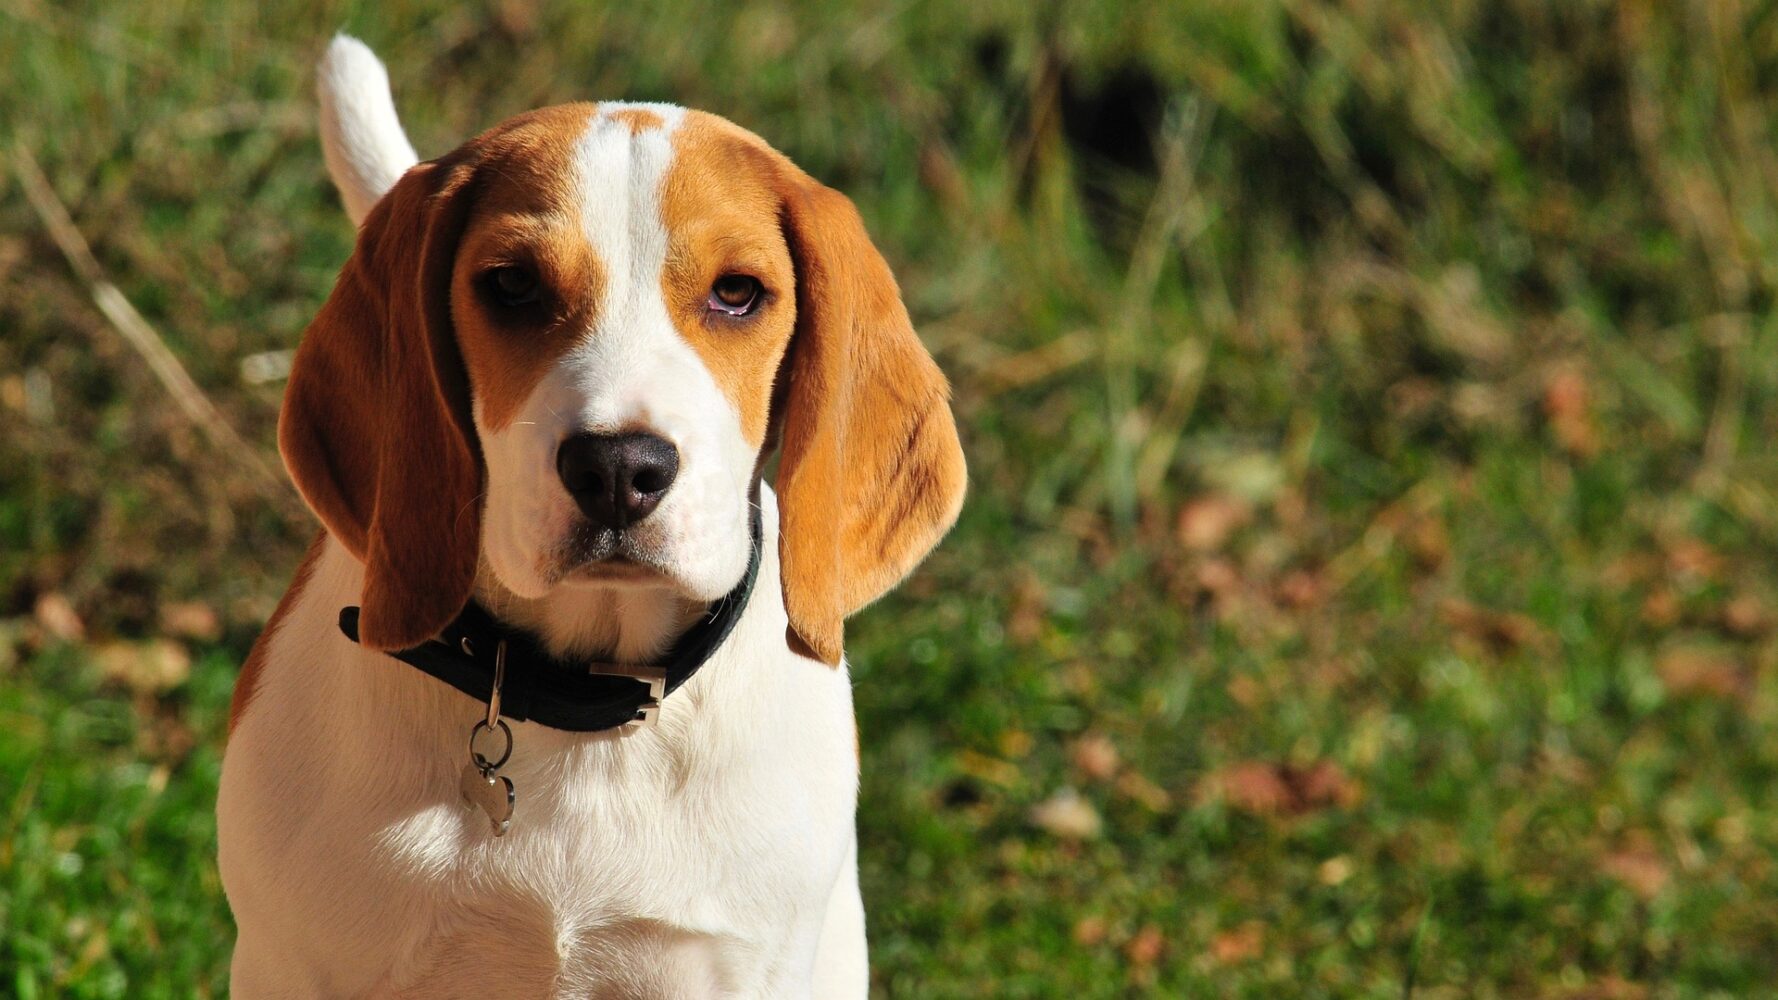 The Beagle Dog: An Adorable Hound with a Nose for Adventure and a Heart of Gold